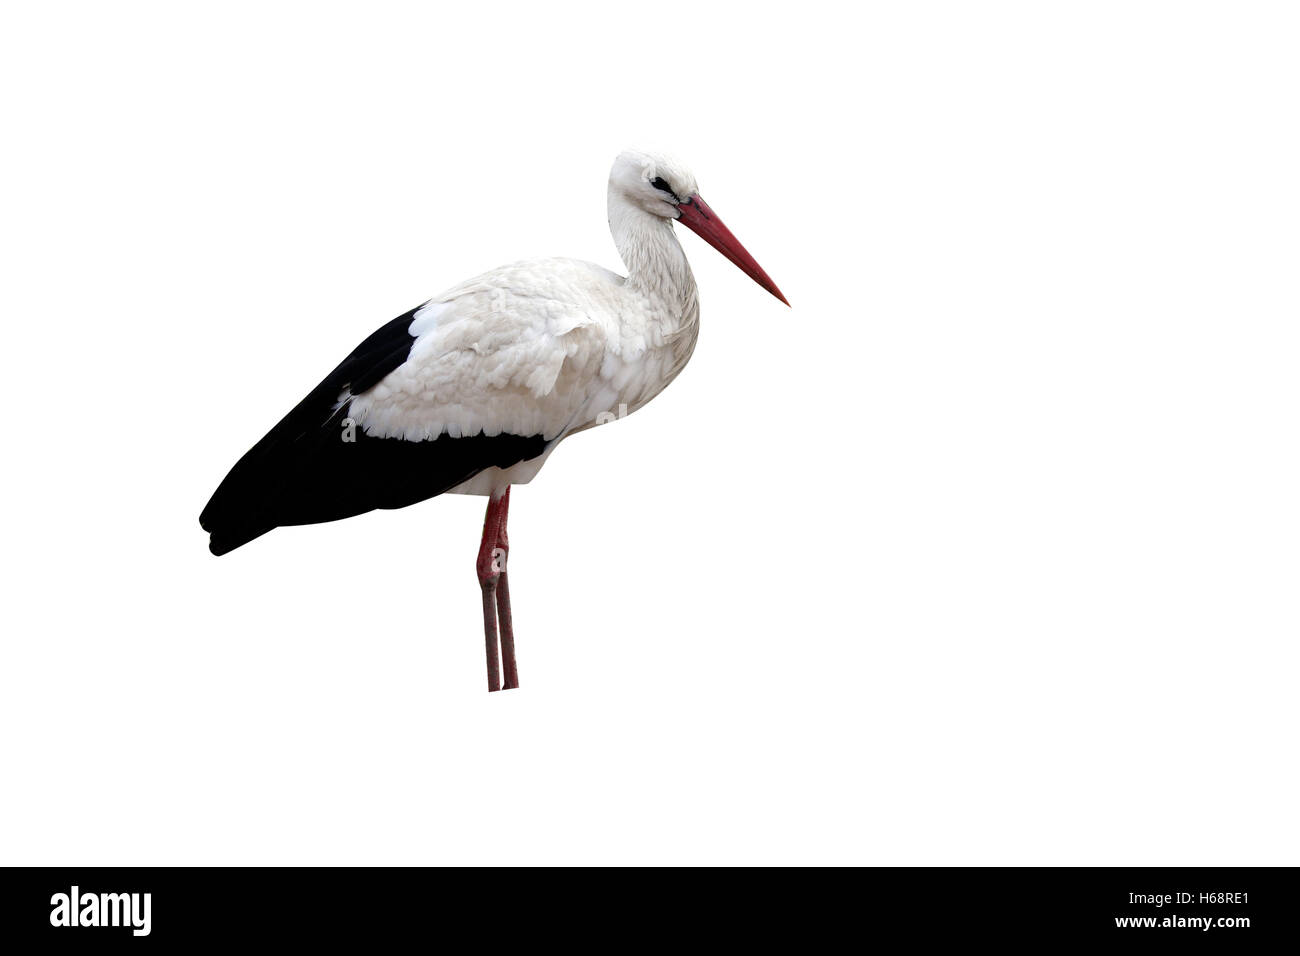 White stork, Ciconia ciconia, single bird on nest on building roof, Spain Stock Photo